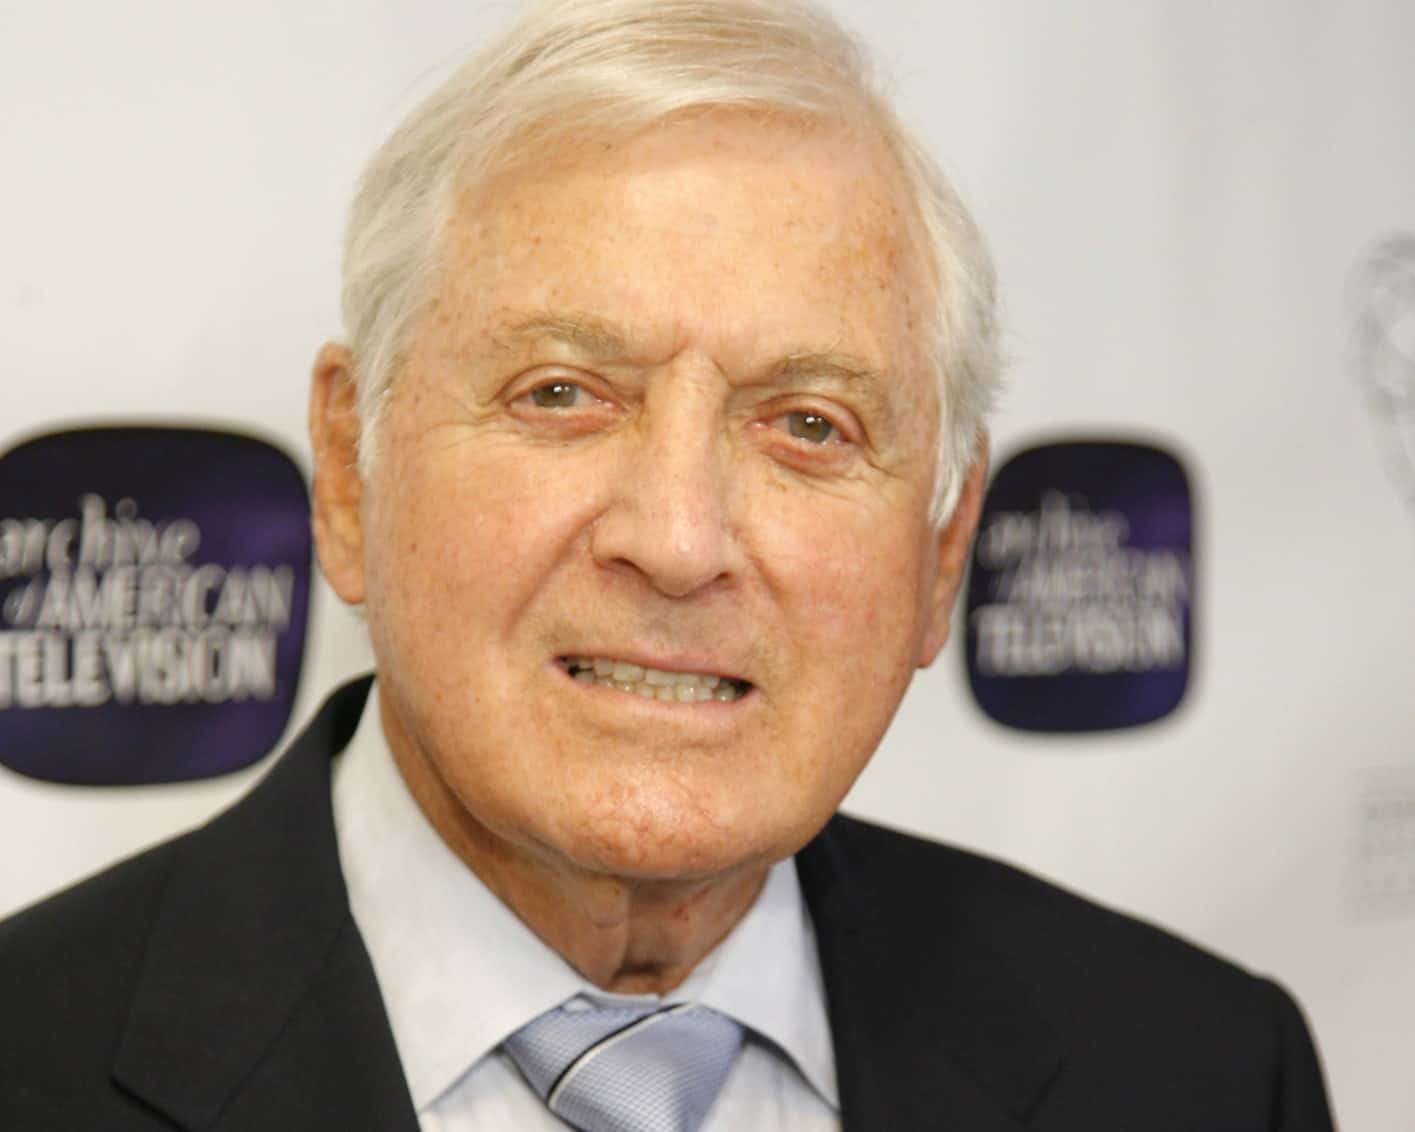 In 1946, Monty Hall moved to Toronto and joined radio station CHUM